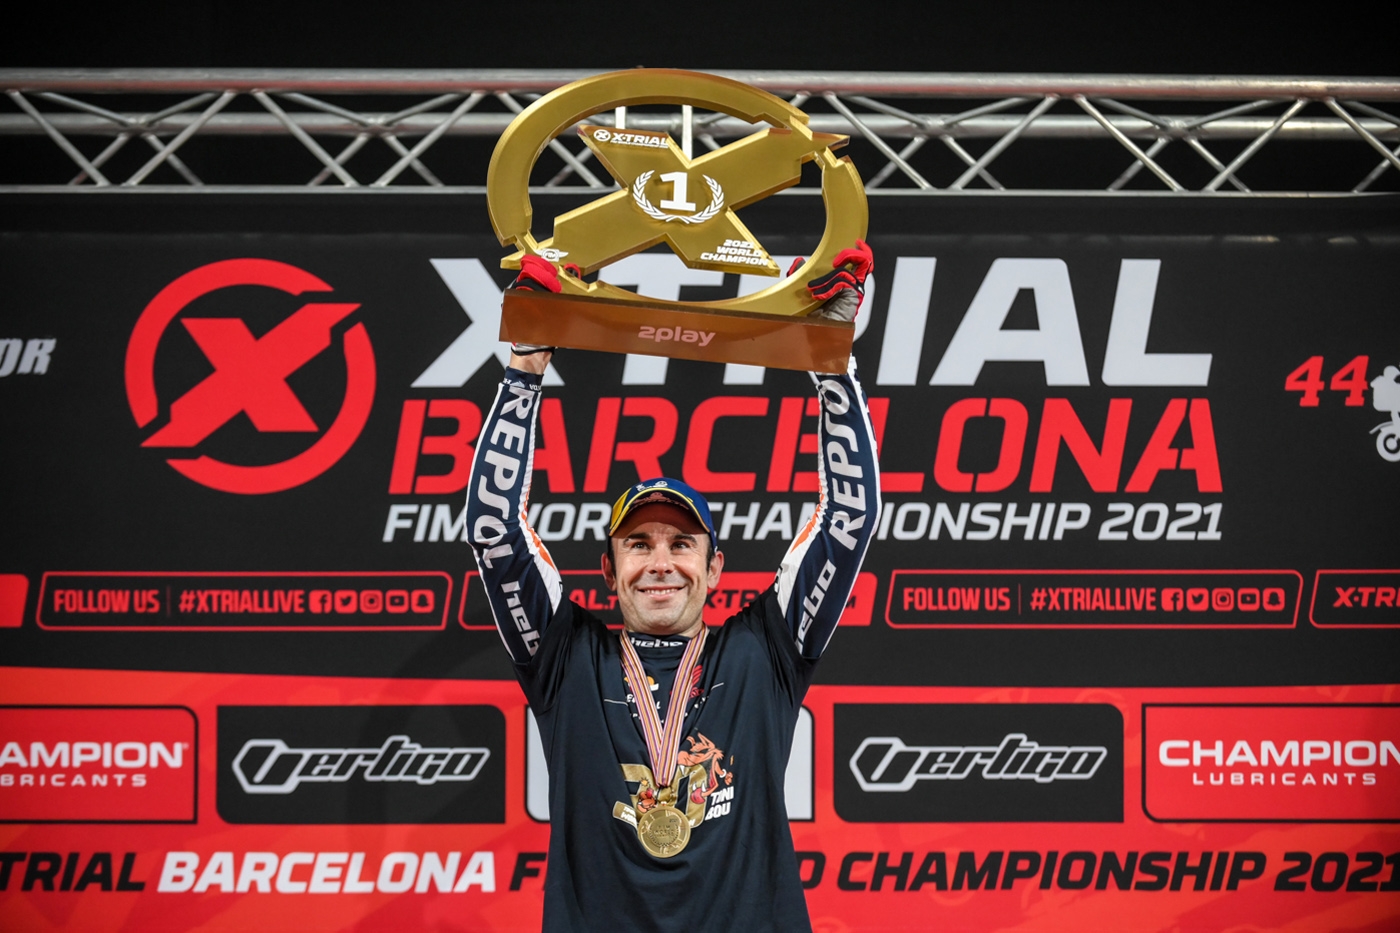 Bou is World Champion again after Barcelona victory